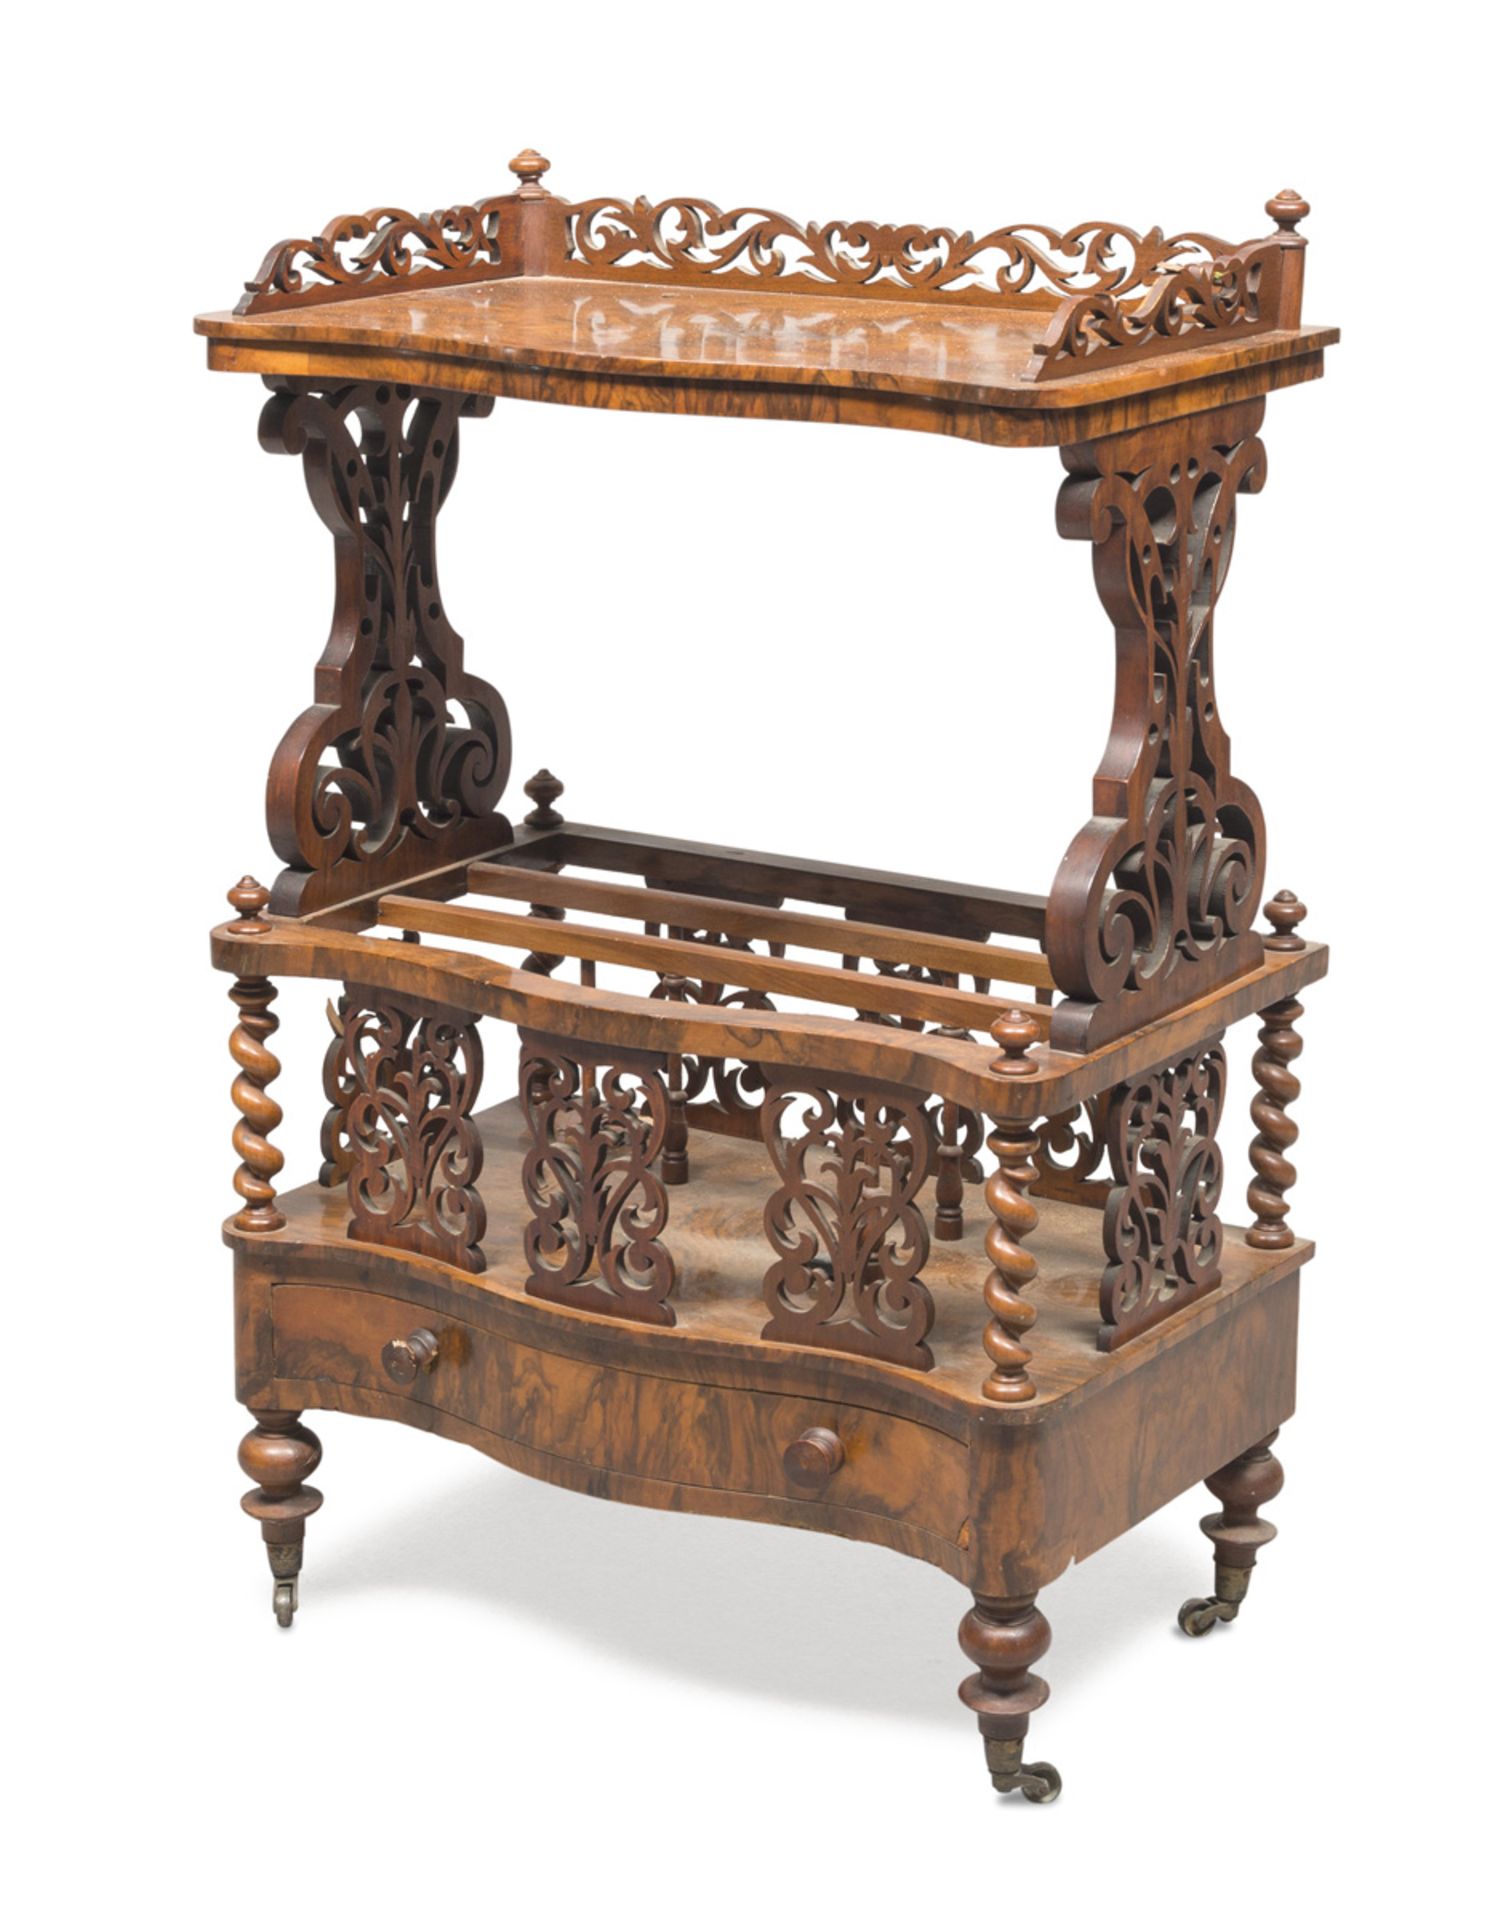 ETAGERE, ENGLAND EDWARDIAN PERIOD in olive briar with sides pierced to vegetal motifs. One drawer in